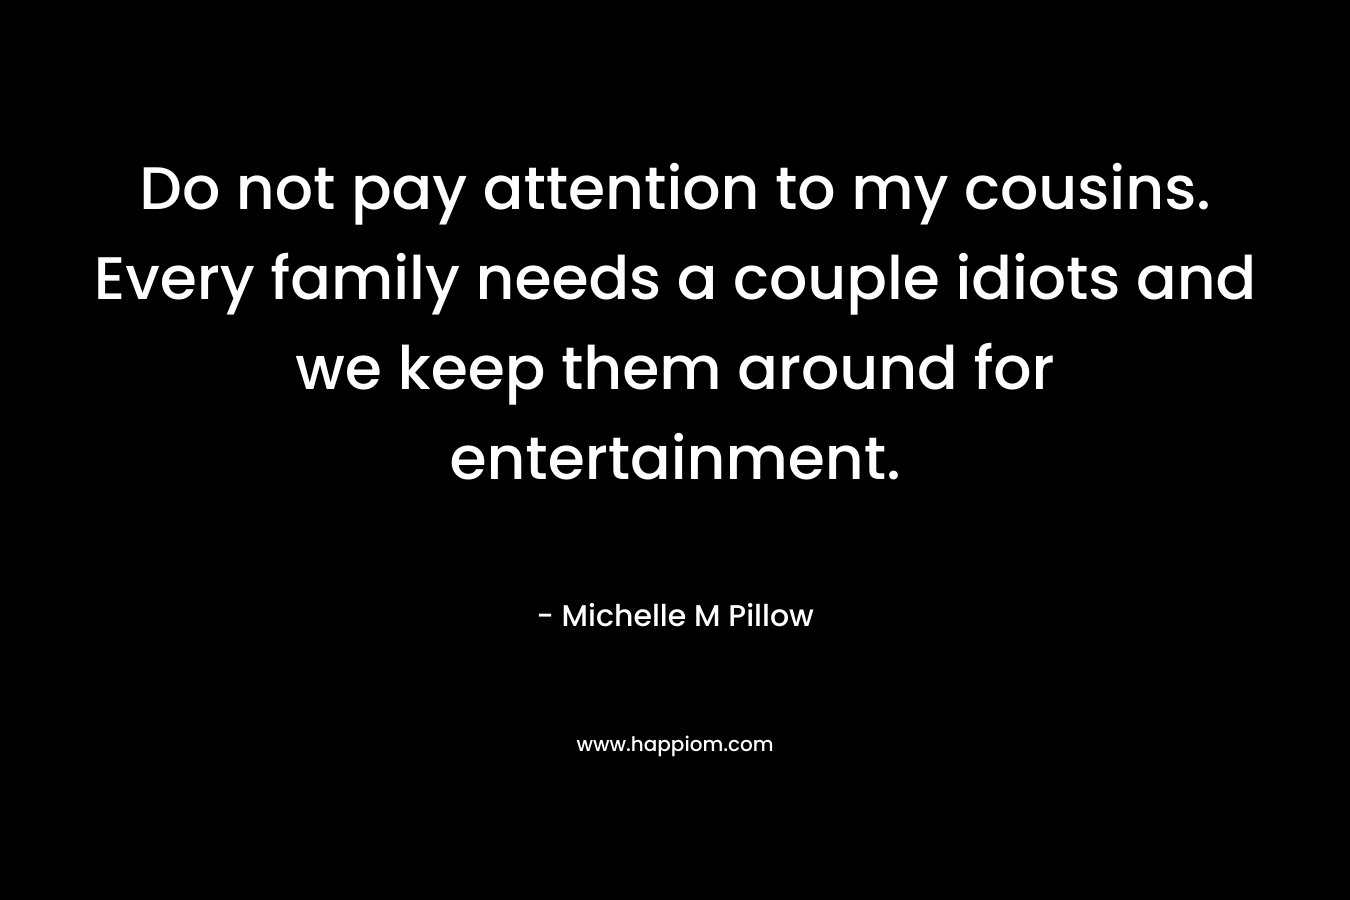 Do not pay attention to my cousins. Every family needs a couple idiots and we keep them around for entertainment. – Michelle M Pillow